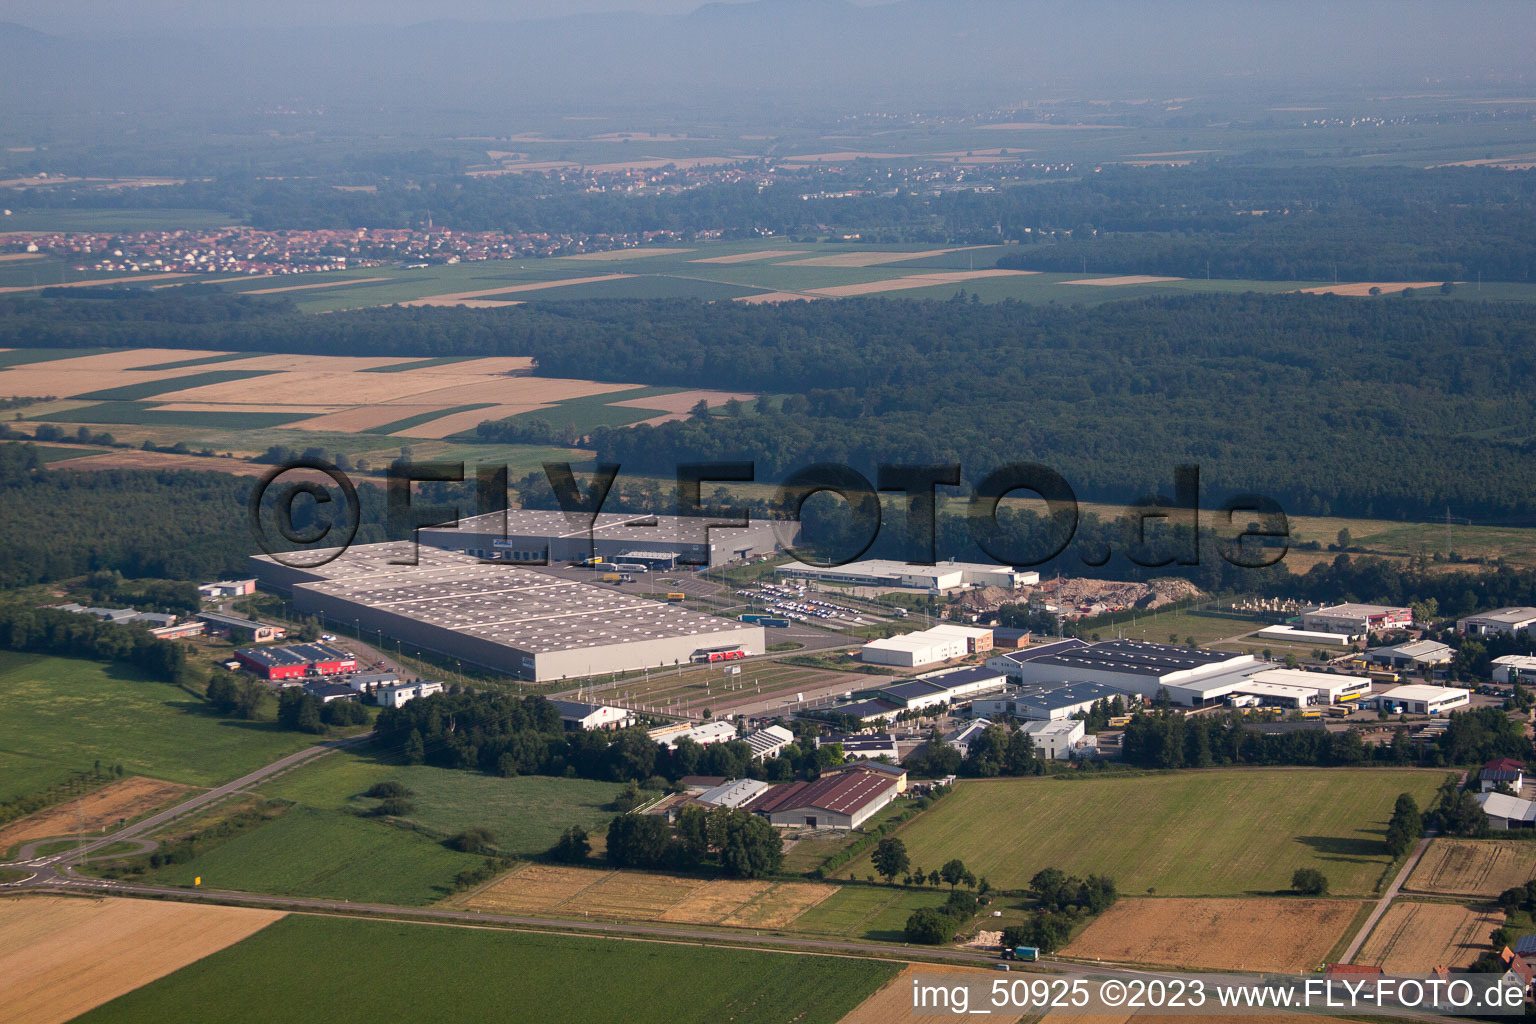 Horst industrial area, coincidence logistics center in the district Minderslachen in Kandel in the state Rhineland-Palatinate, Germany